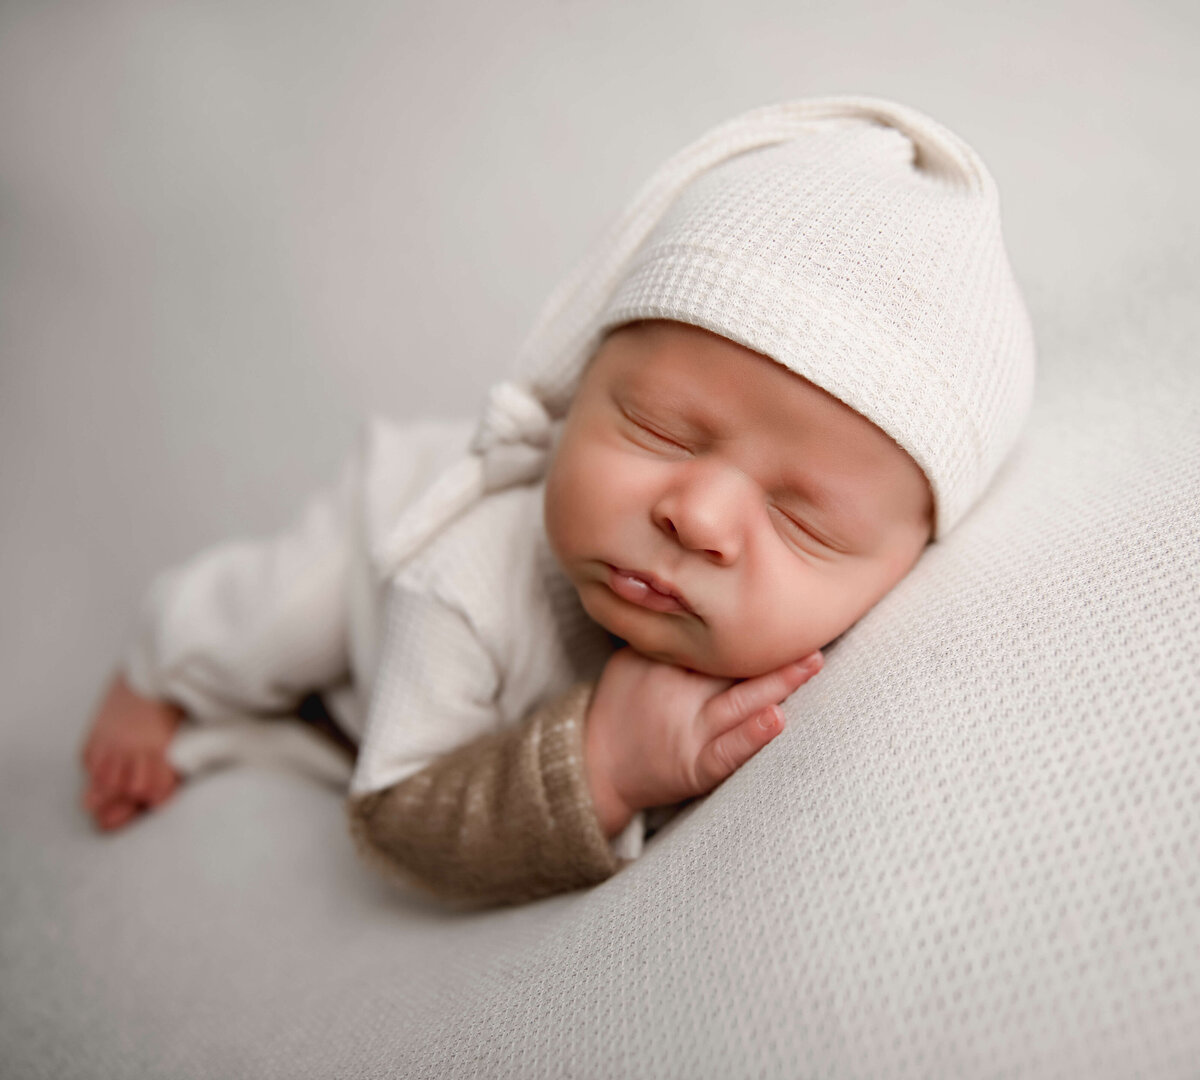 Side lying pose of a newborn baby boy in a white sleeper with sleepy hat in an Erie Pa photography studio